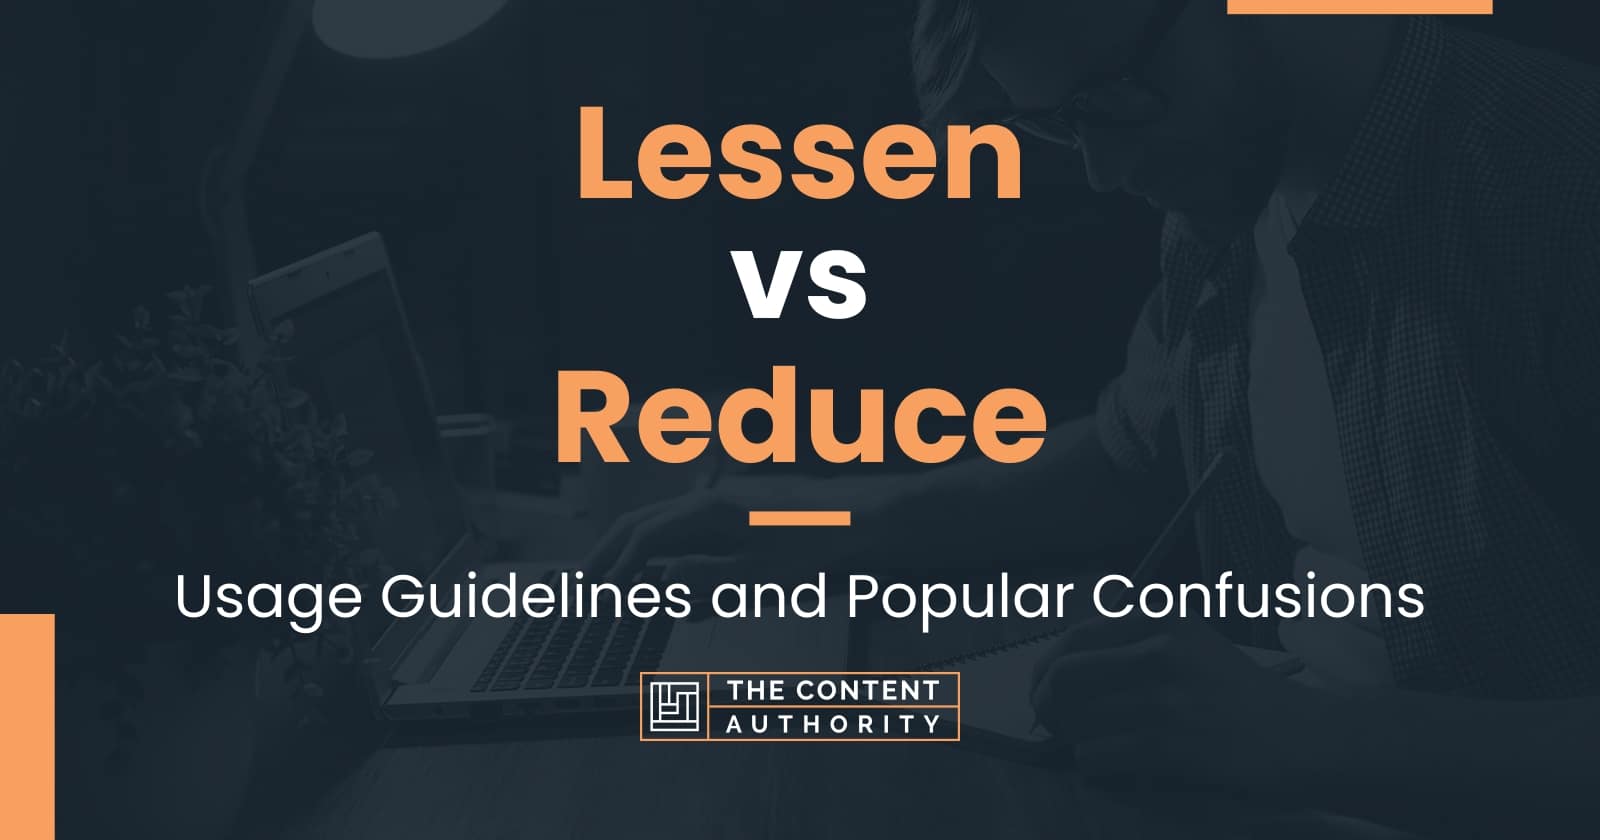 Lessen vs Reduce: Usage Guidelines and Popular Confusions